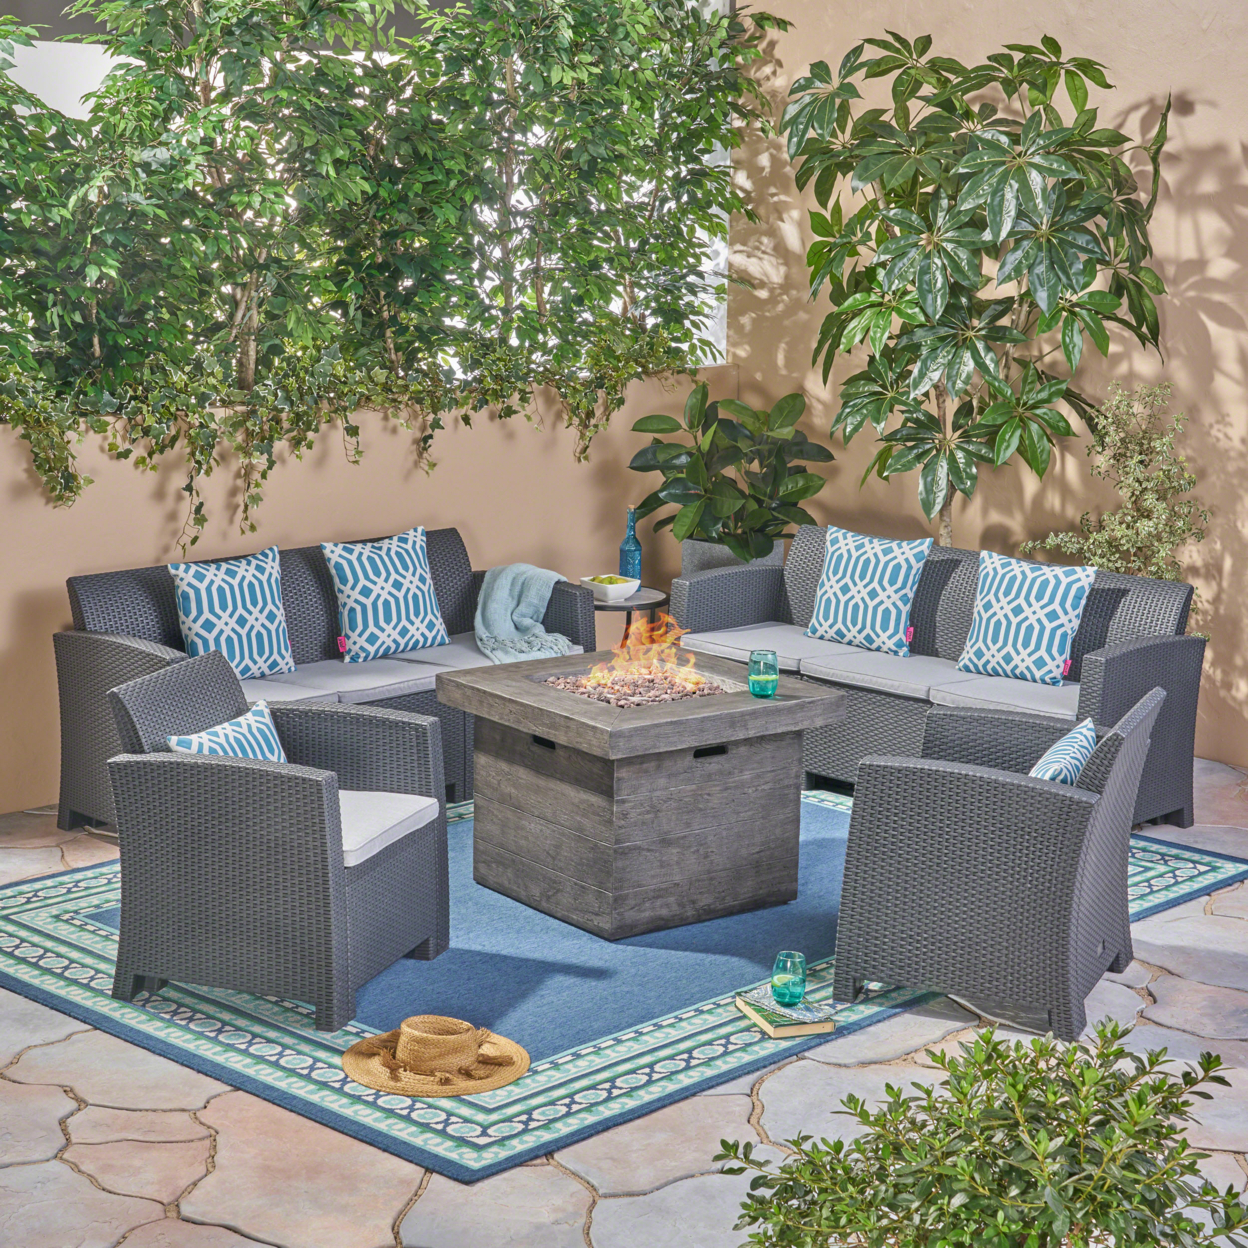 Irwin Outdoor Wicker Chat Set With Fire Pit - Charcoal + Light Gray + Gray